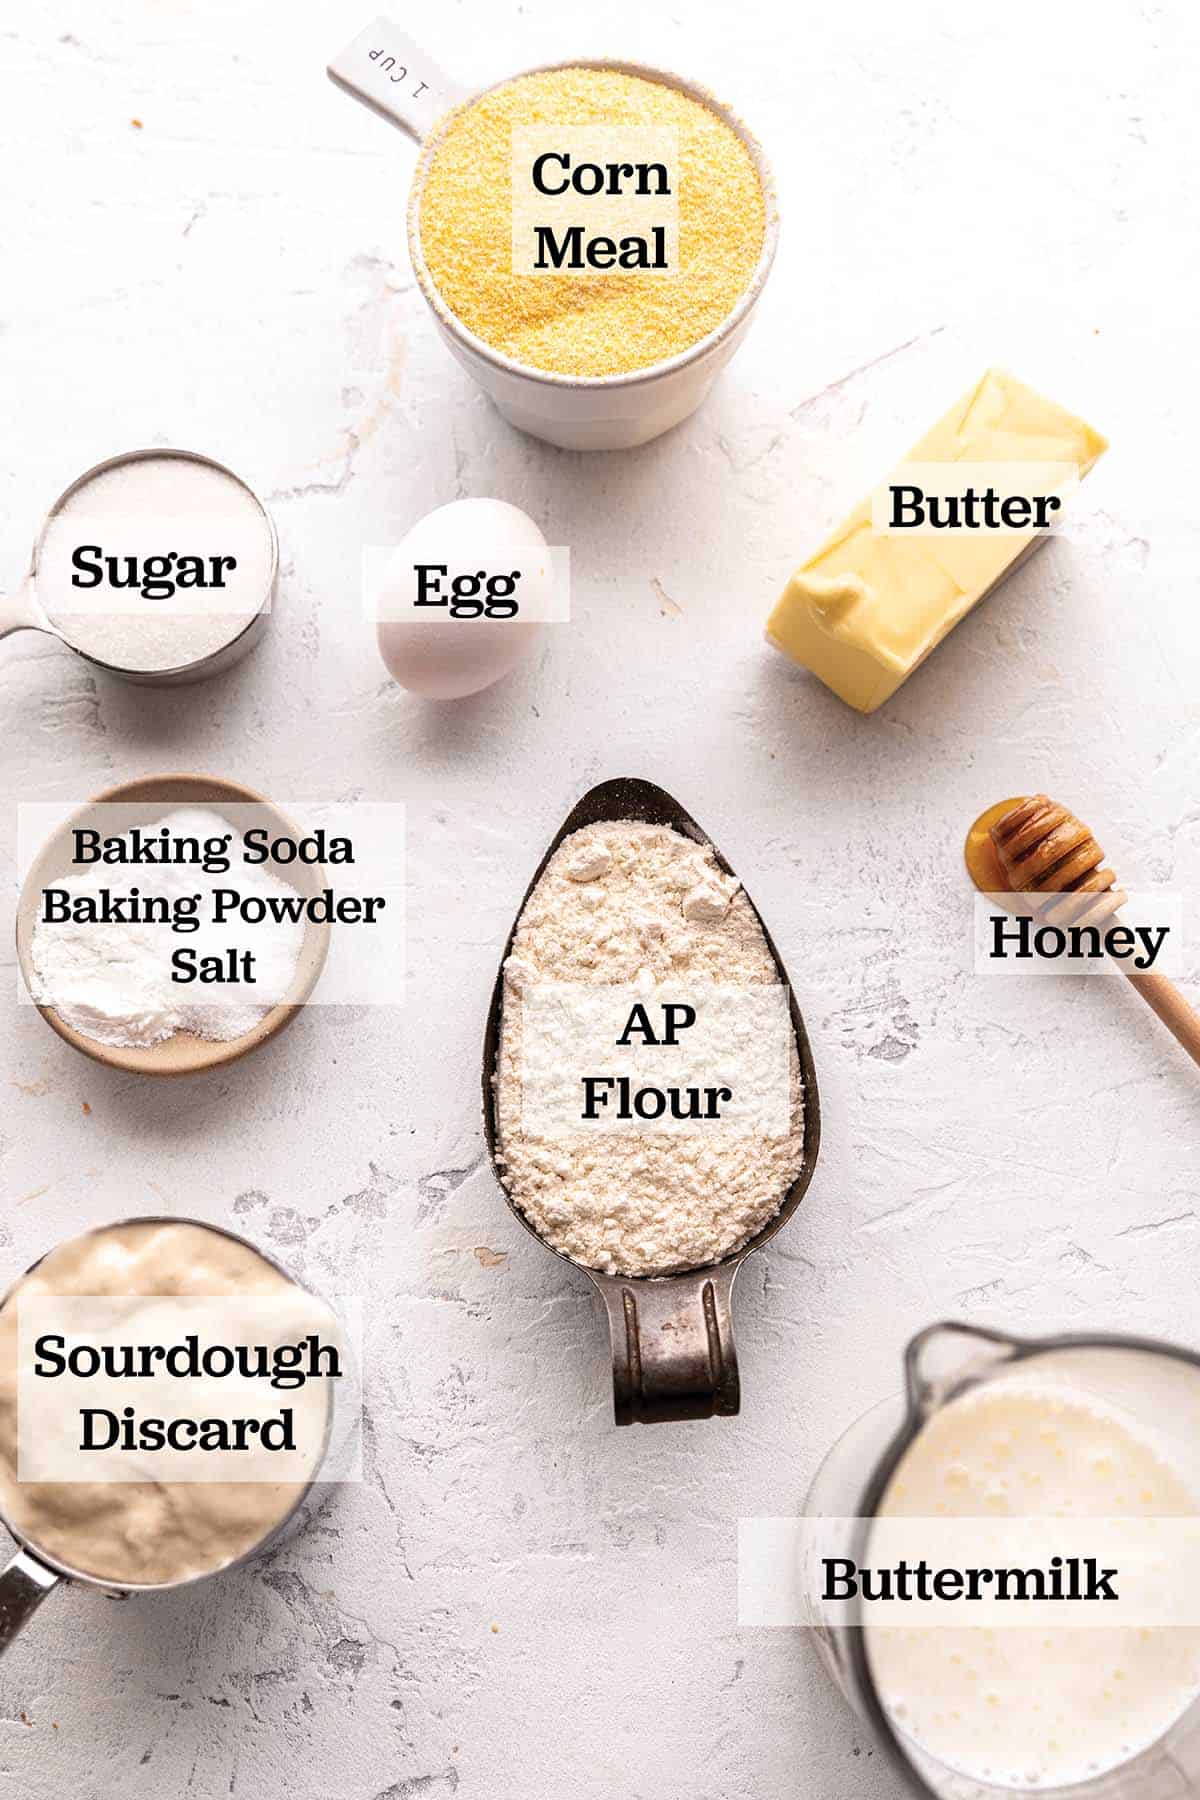 Ingredients measured out to make bread with cornmeal, flour, honey, sugar, egg, salt, and sourdough discard.